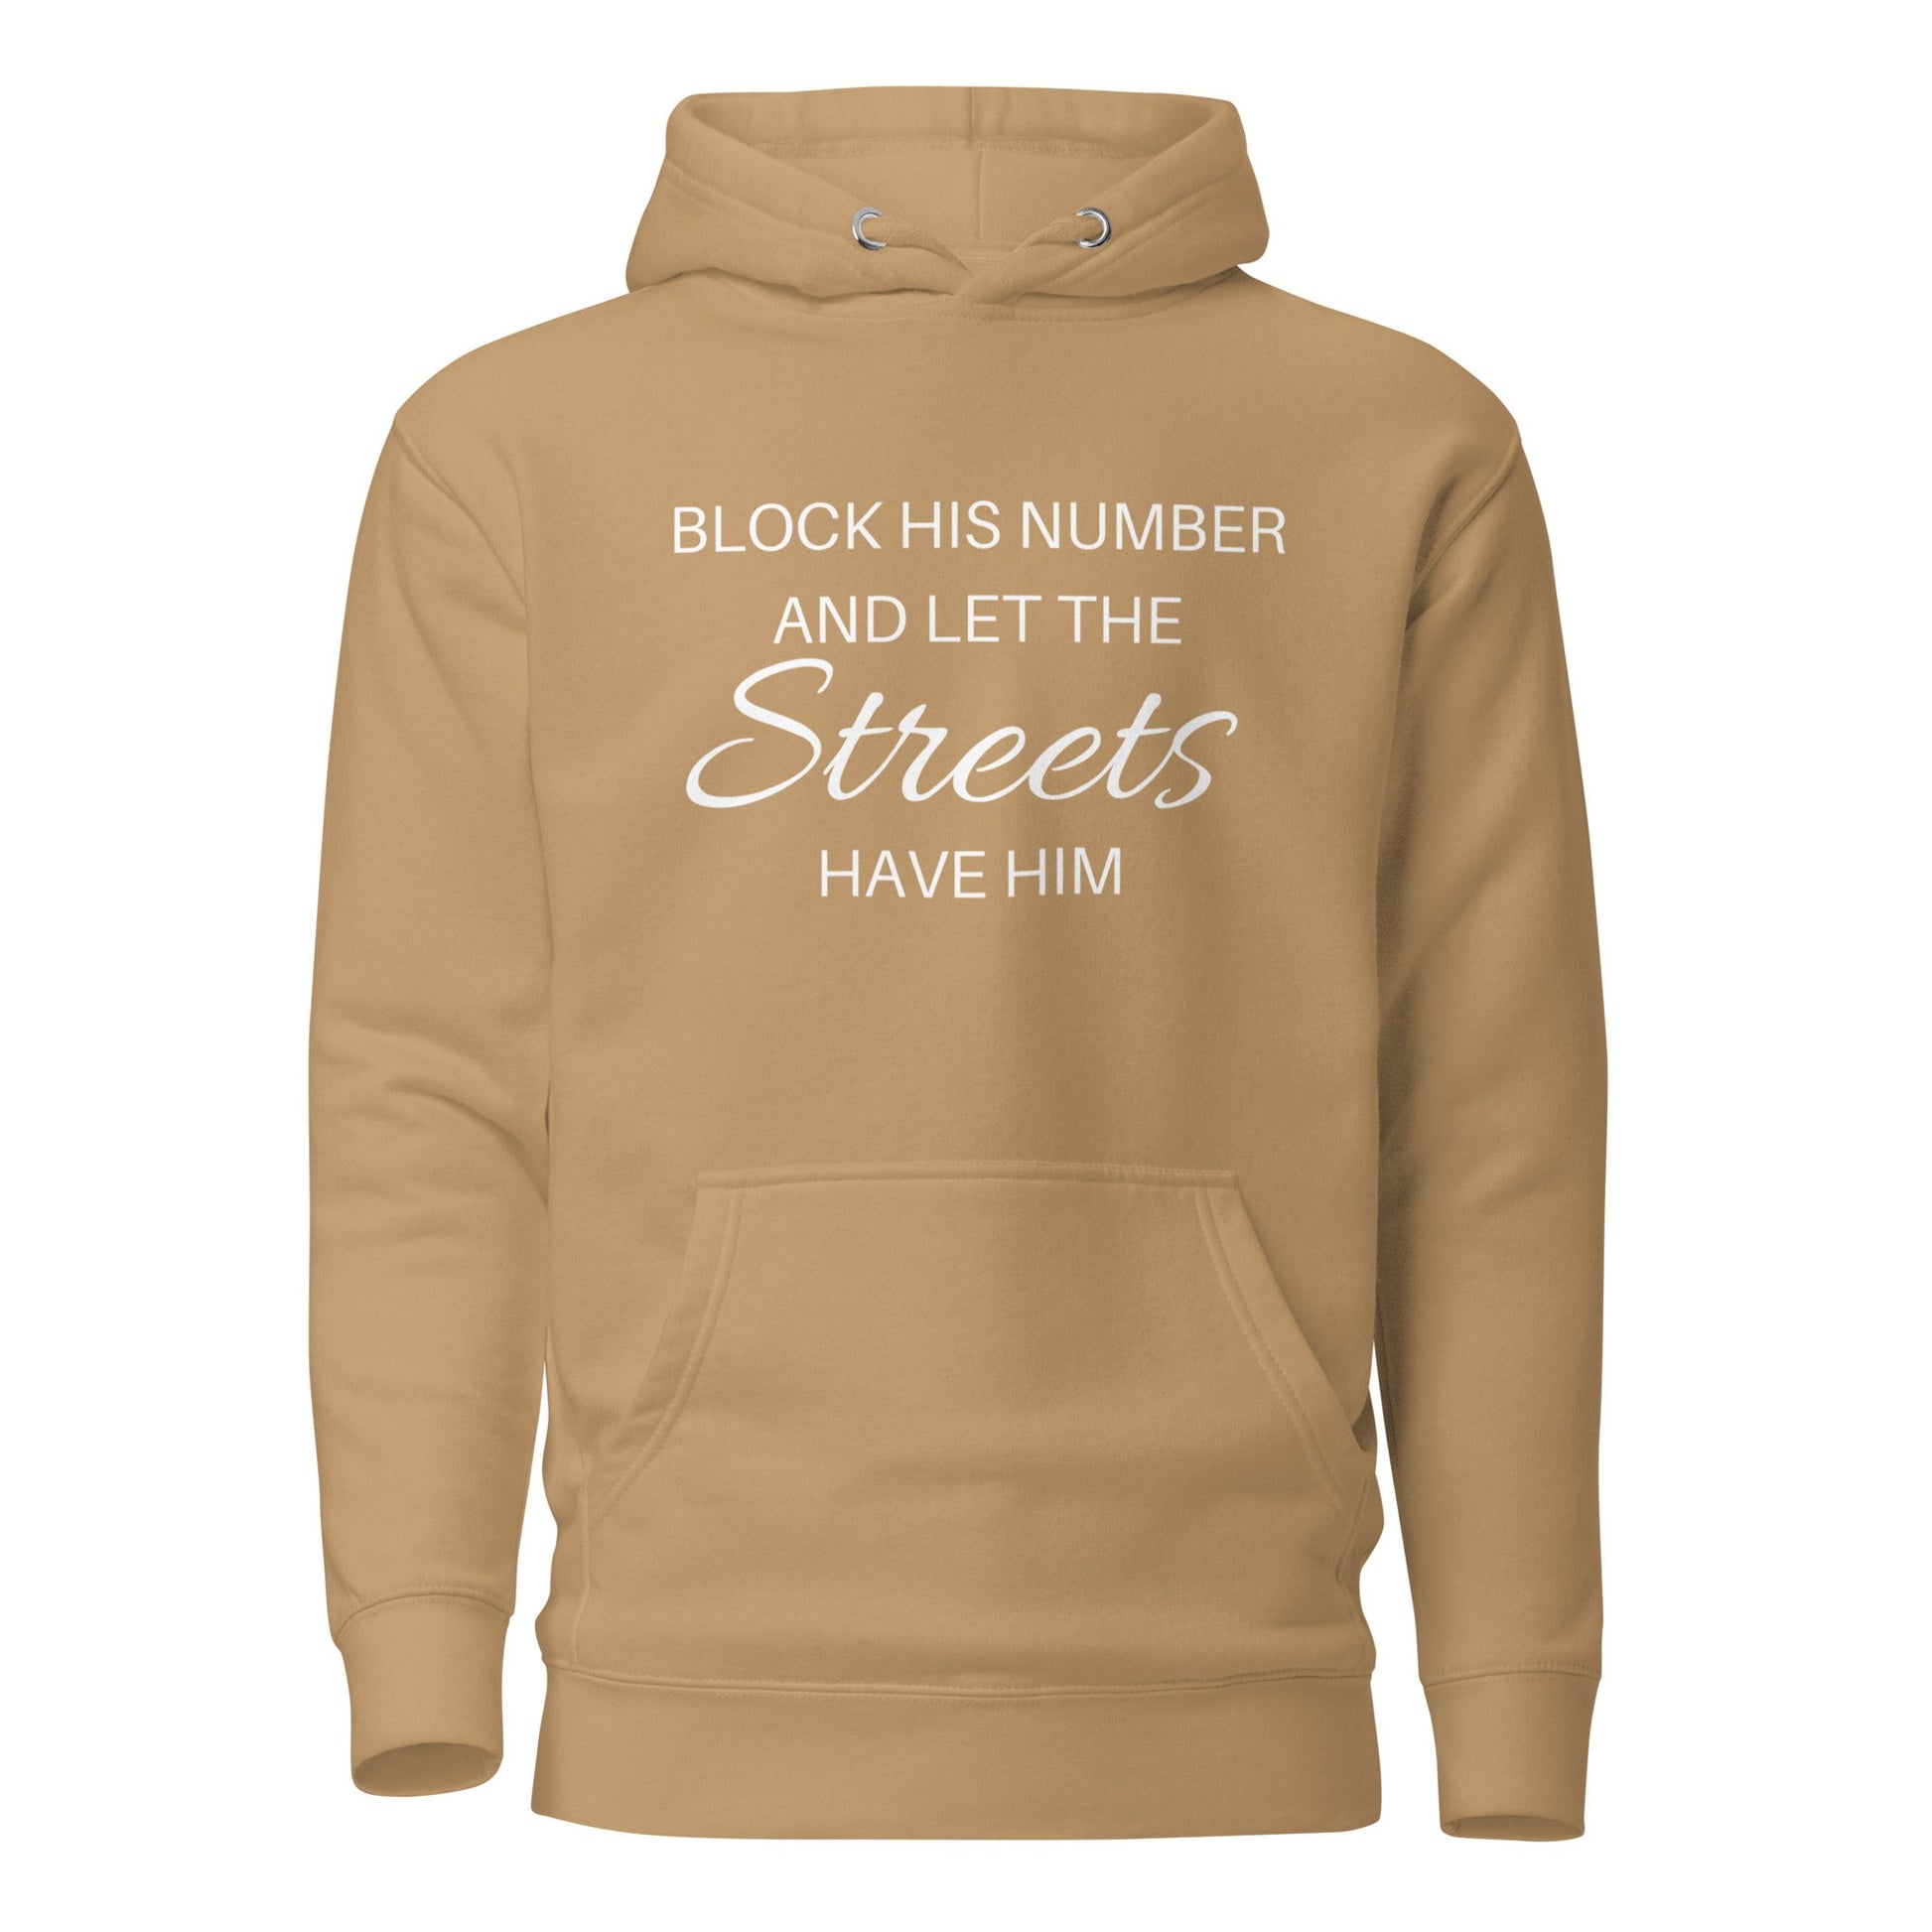 Block his number and let the streets have him Unisex Hoodie - Catch This Tea Shirts